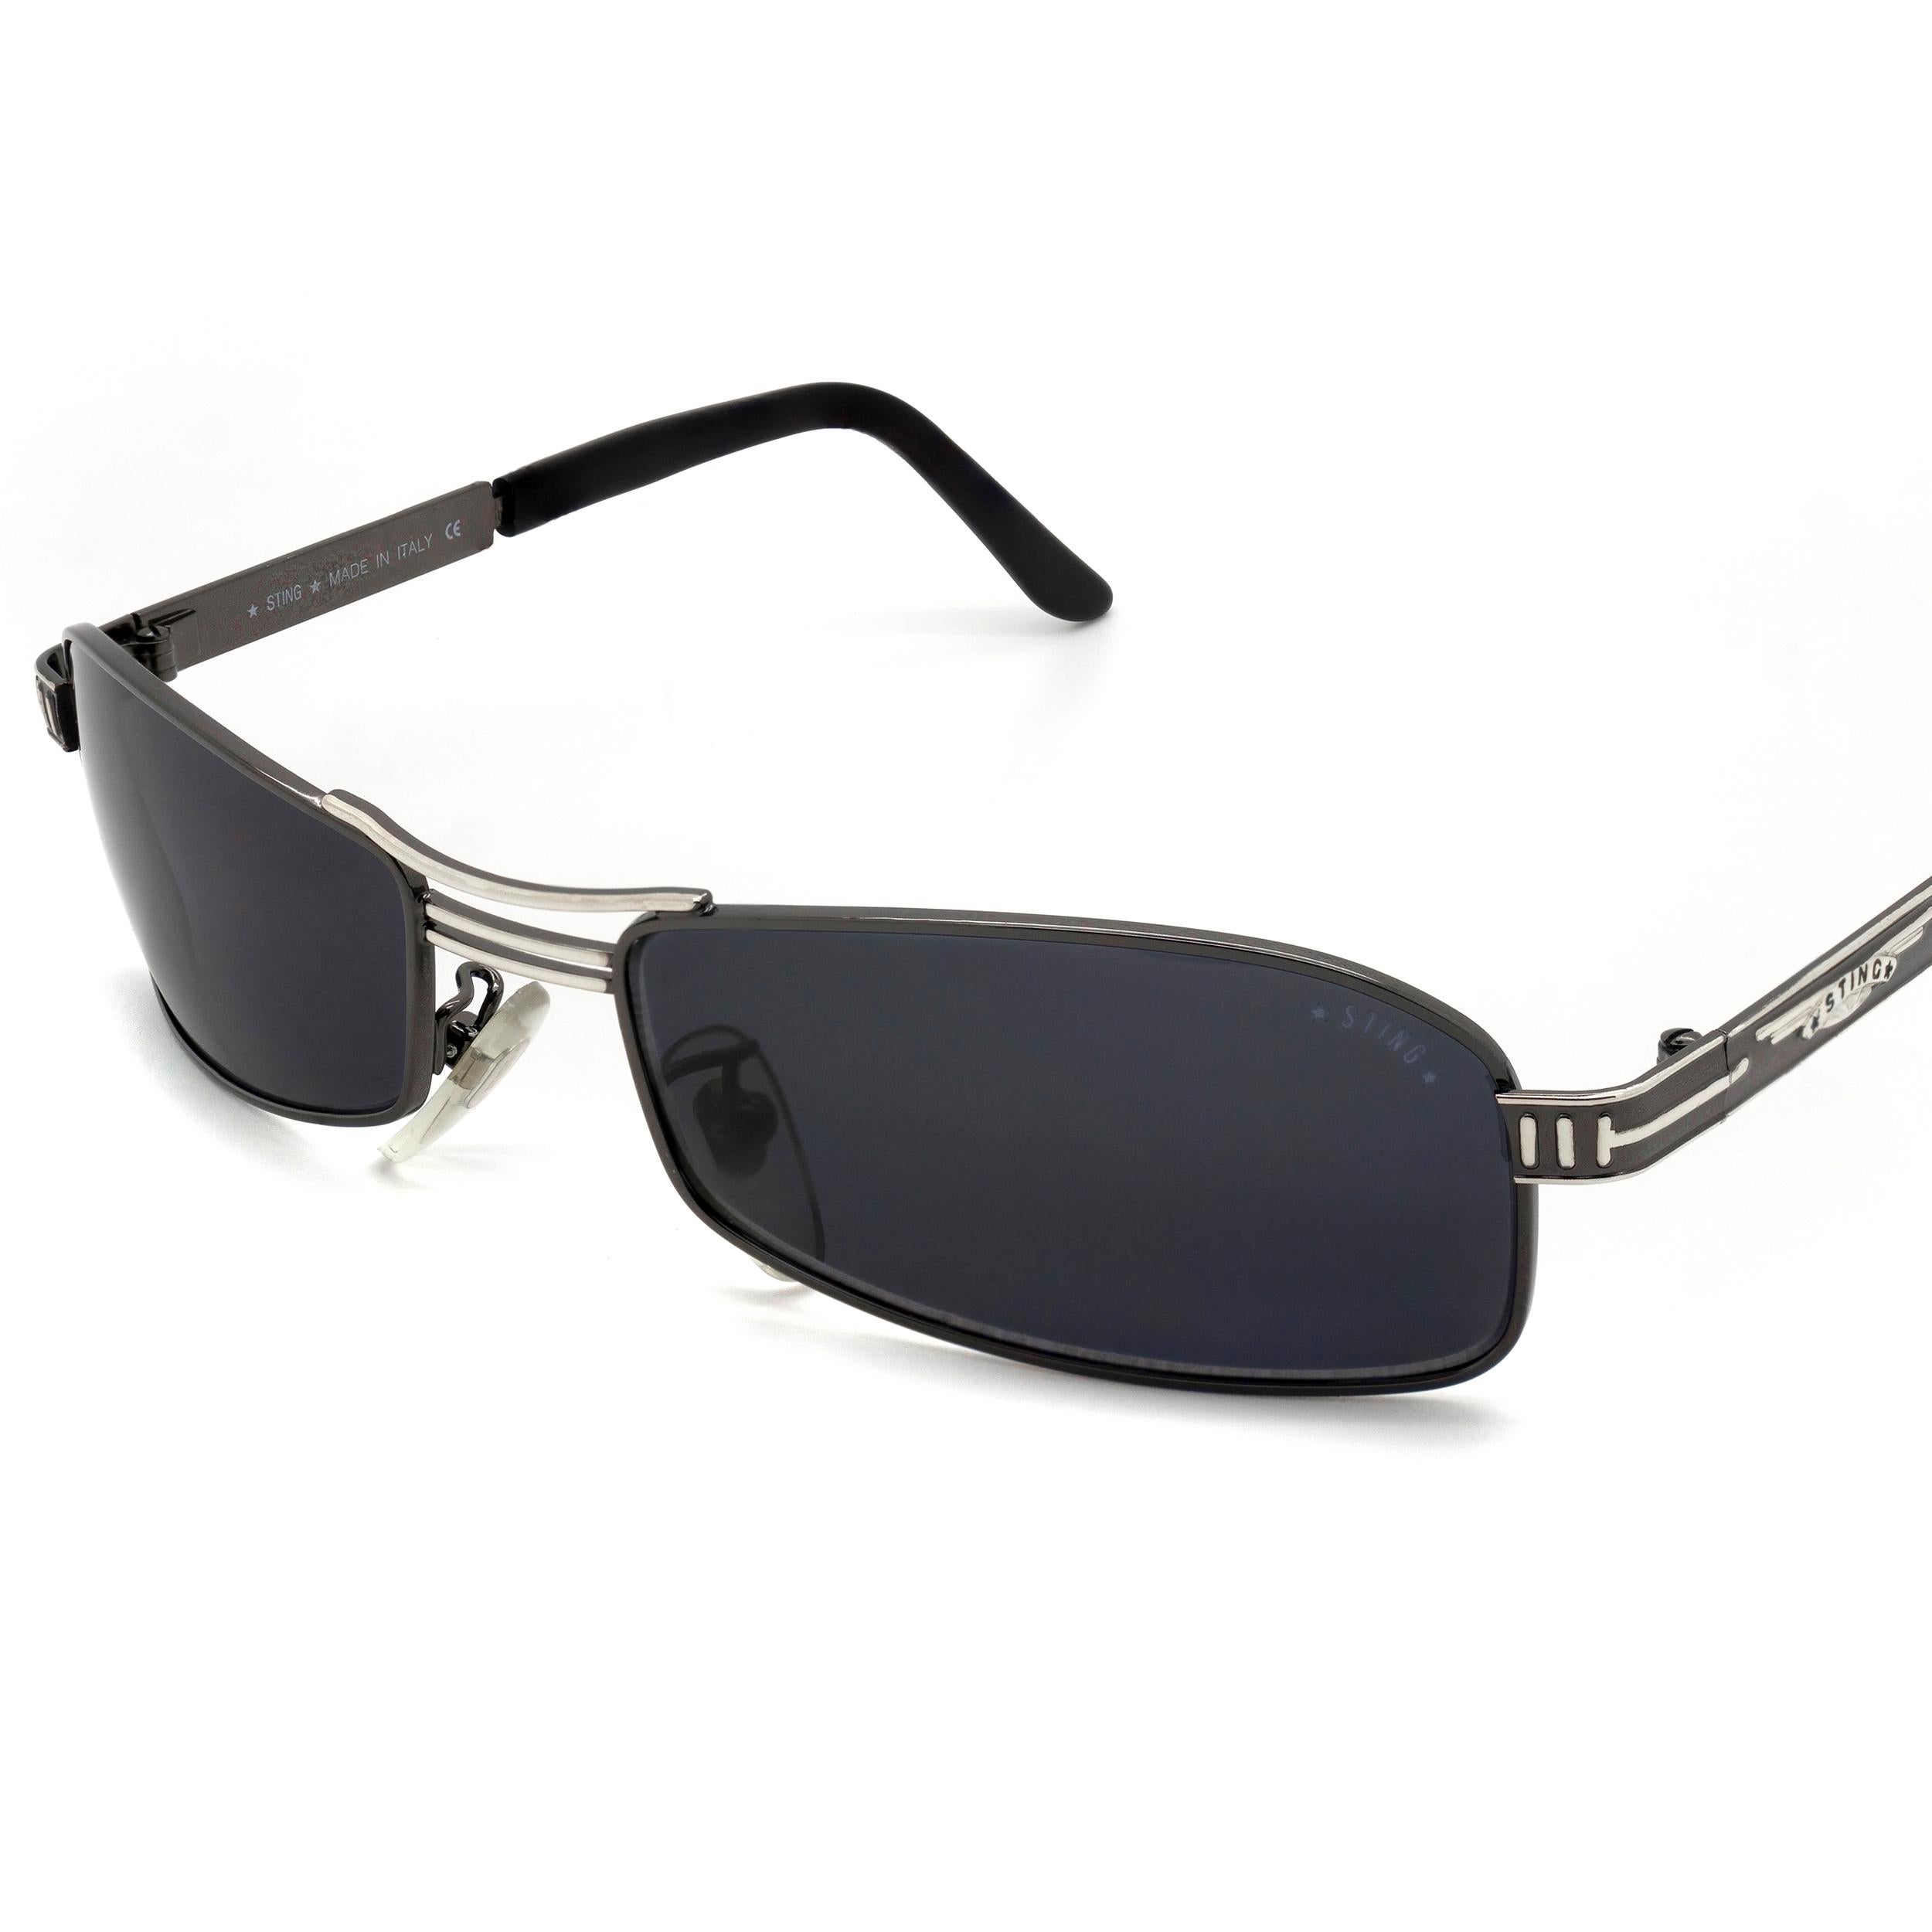 sting sunglasses made in italy